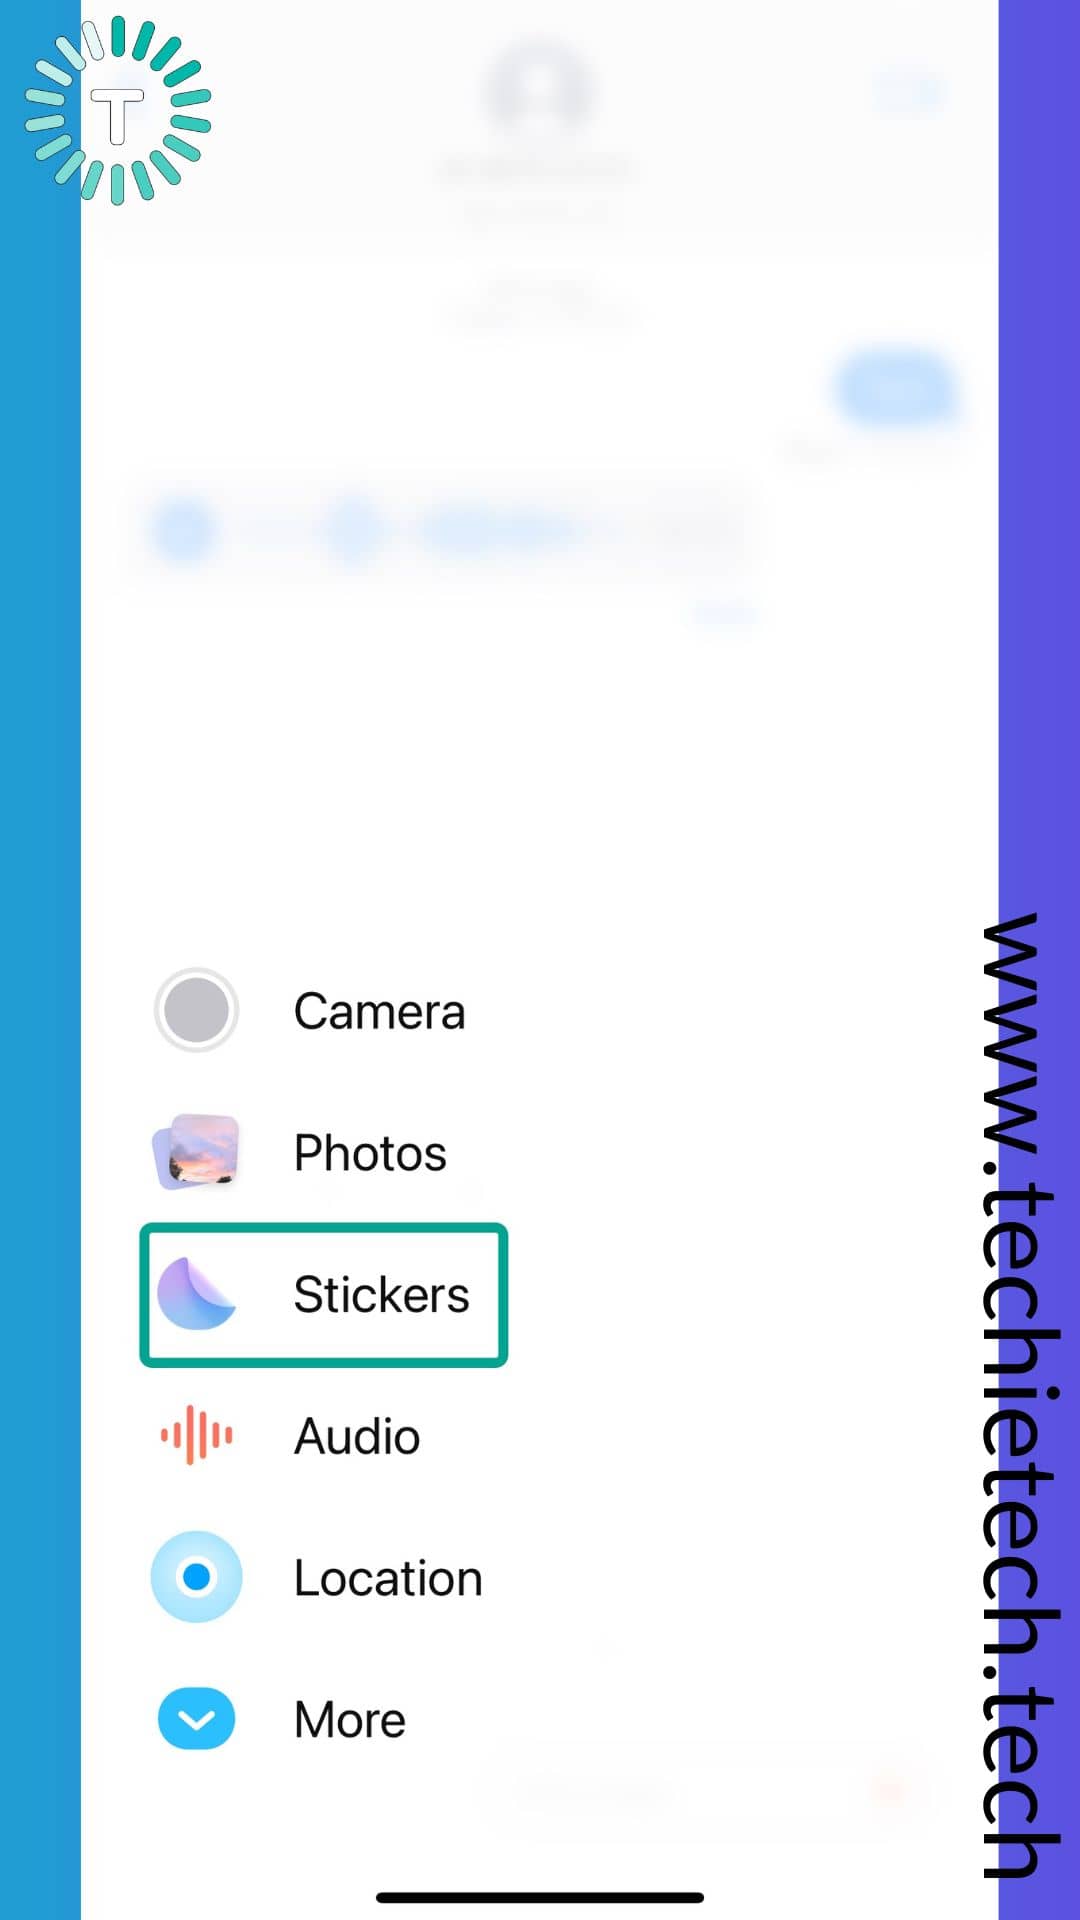 Tap Stickers